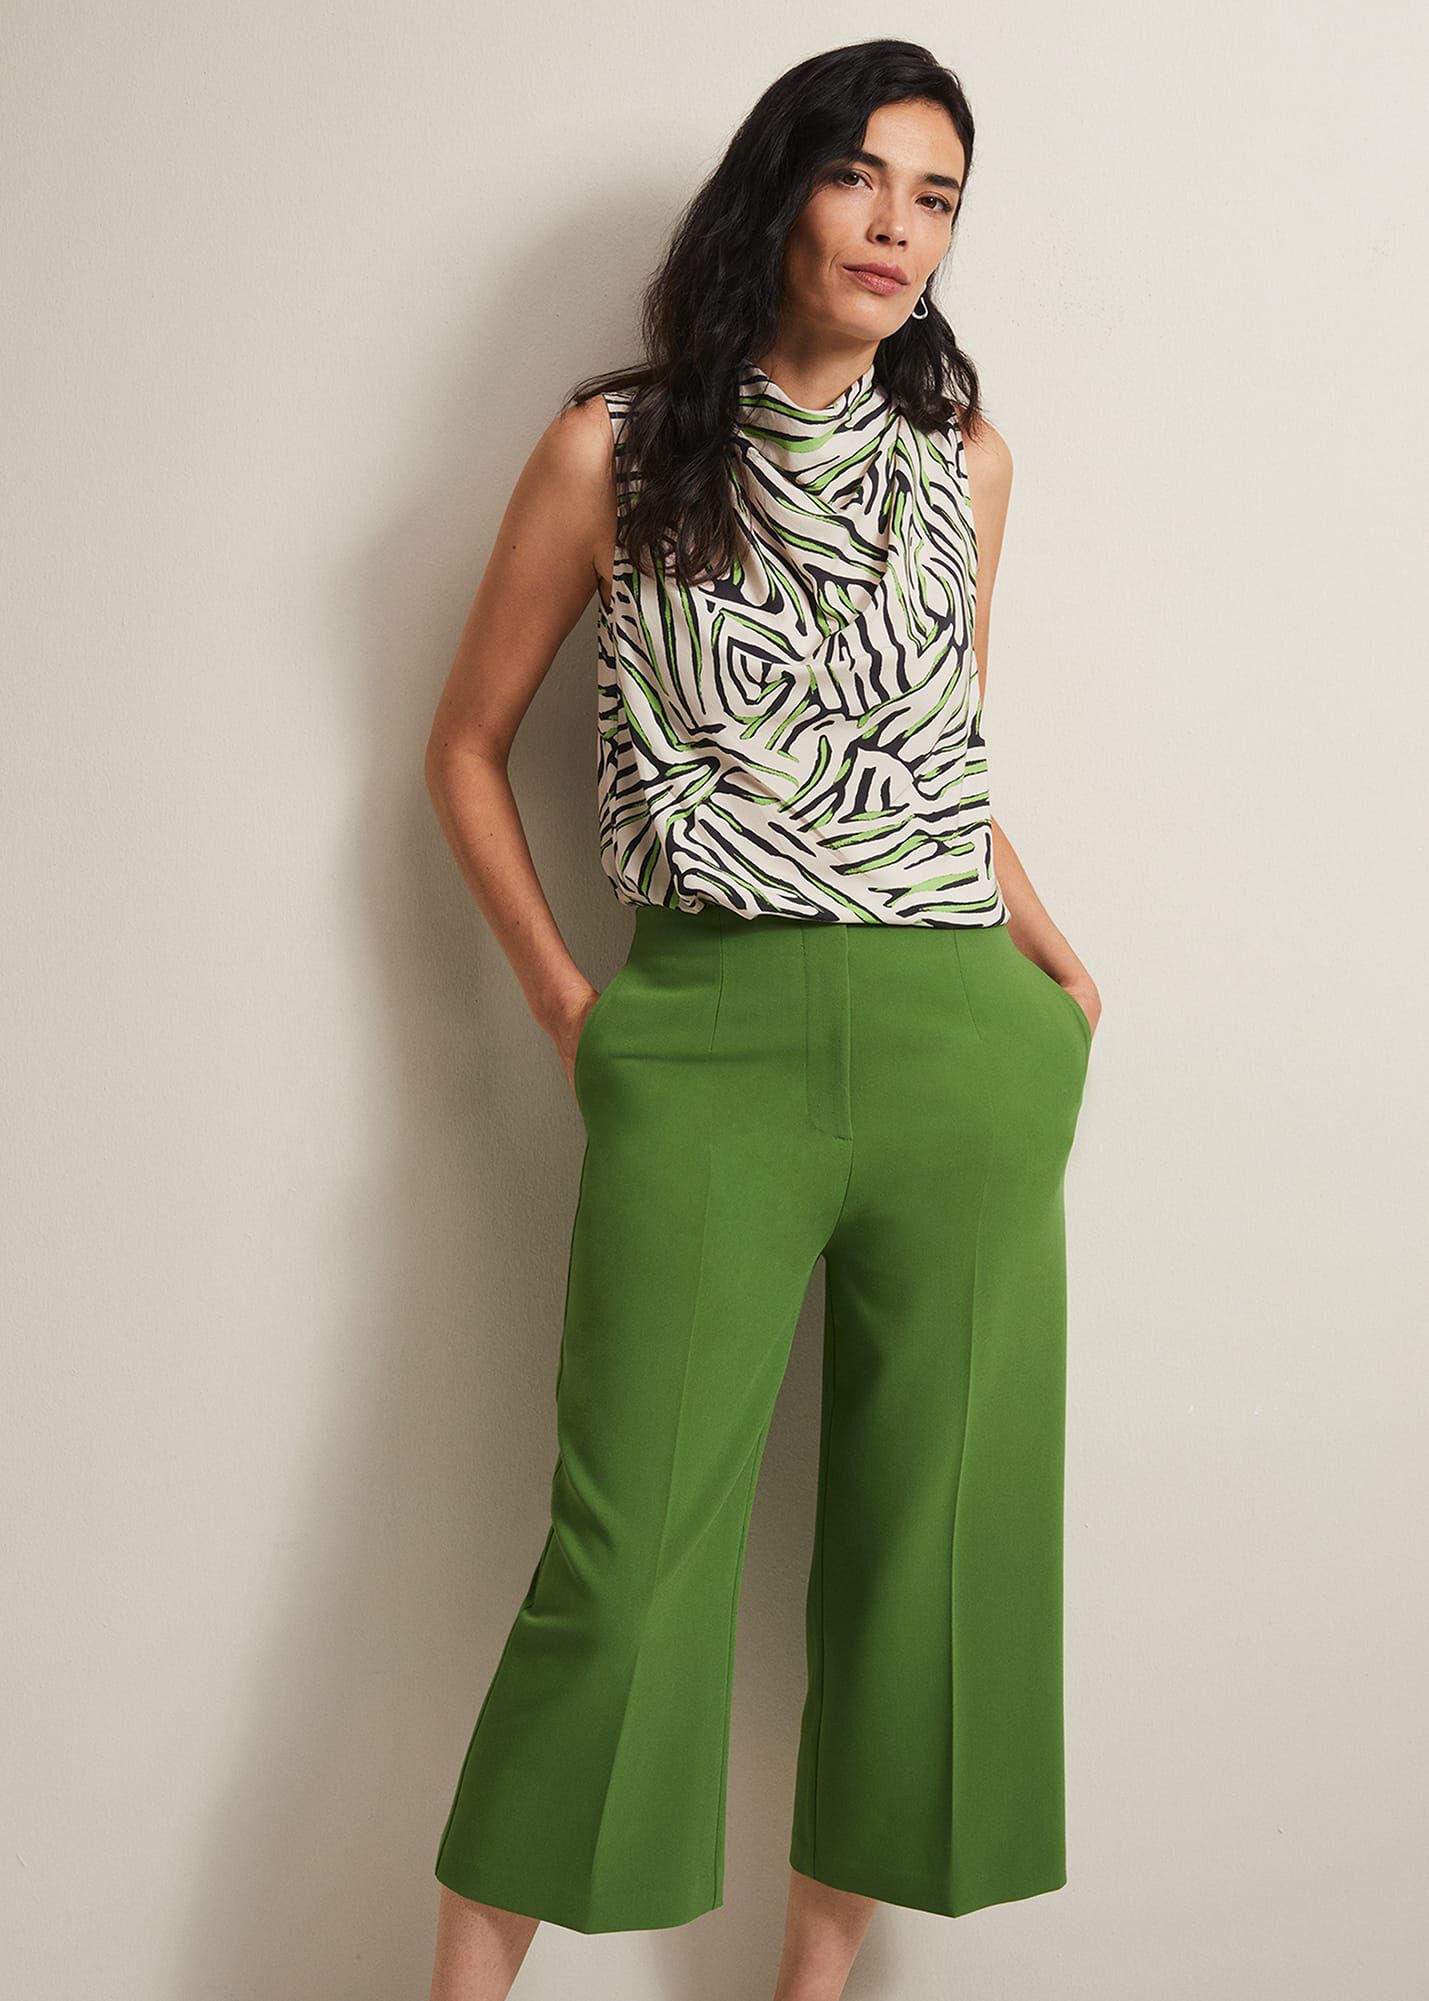 Cotton On Culottes : Buy Cotton On Women Multicolor Culotte Pant Online |  Nykaa Fashion